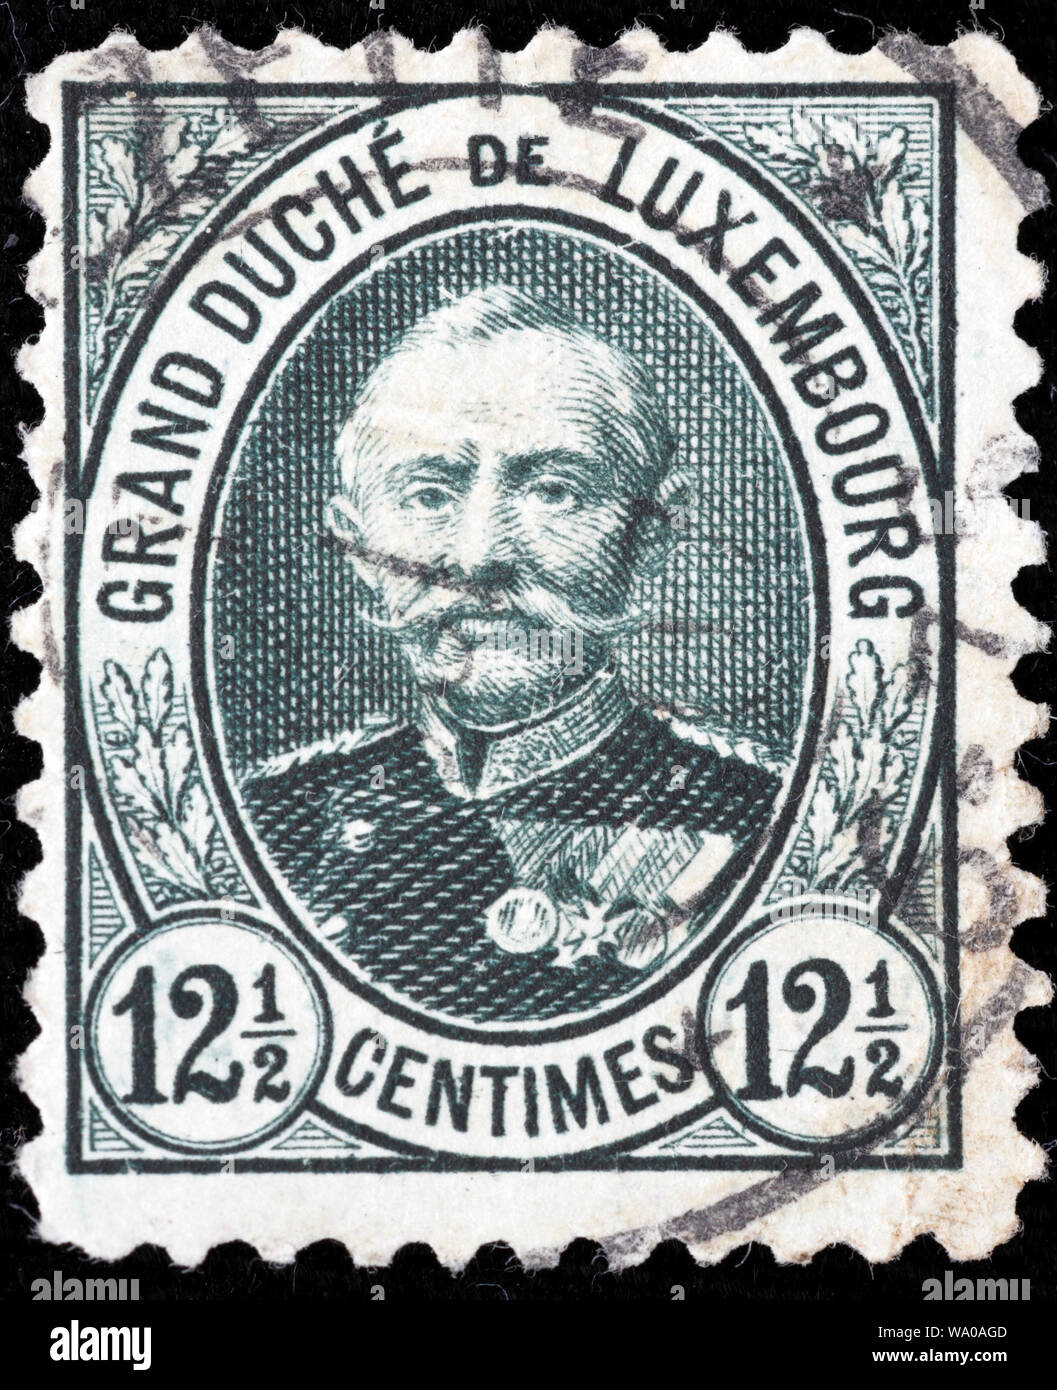 Adolphe I, Grand Duke of Luxembourg (1890-1905), postage stamp, Luxembourg, 1893 Stock Photo